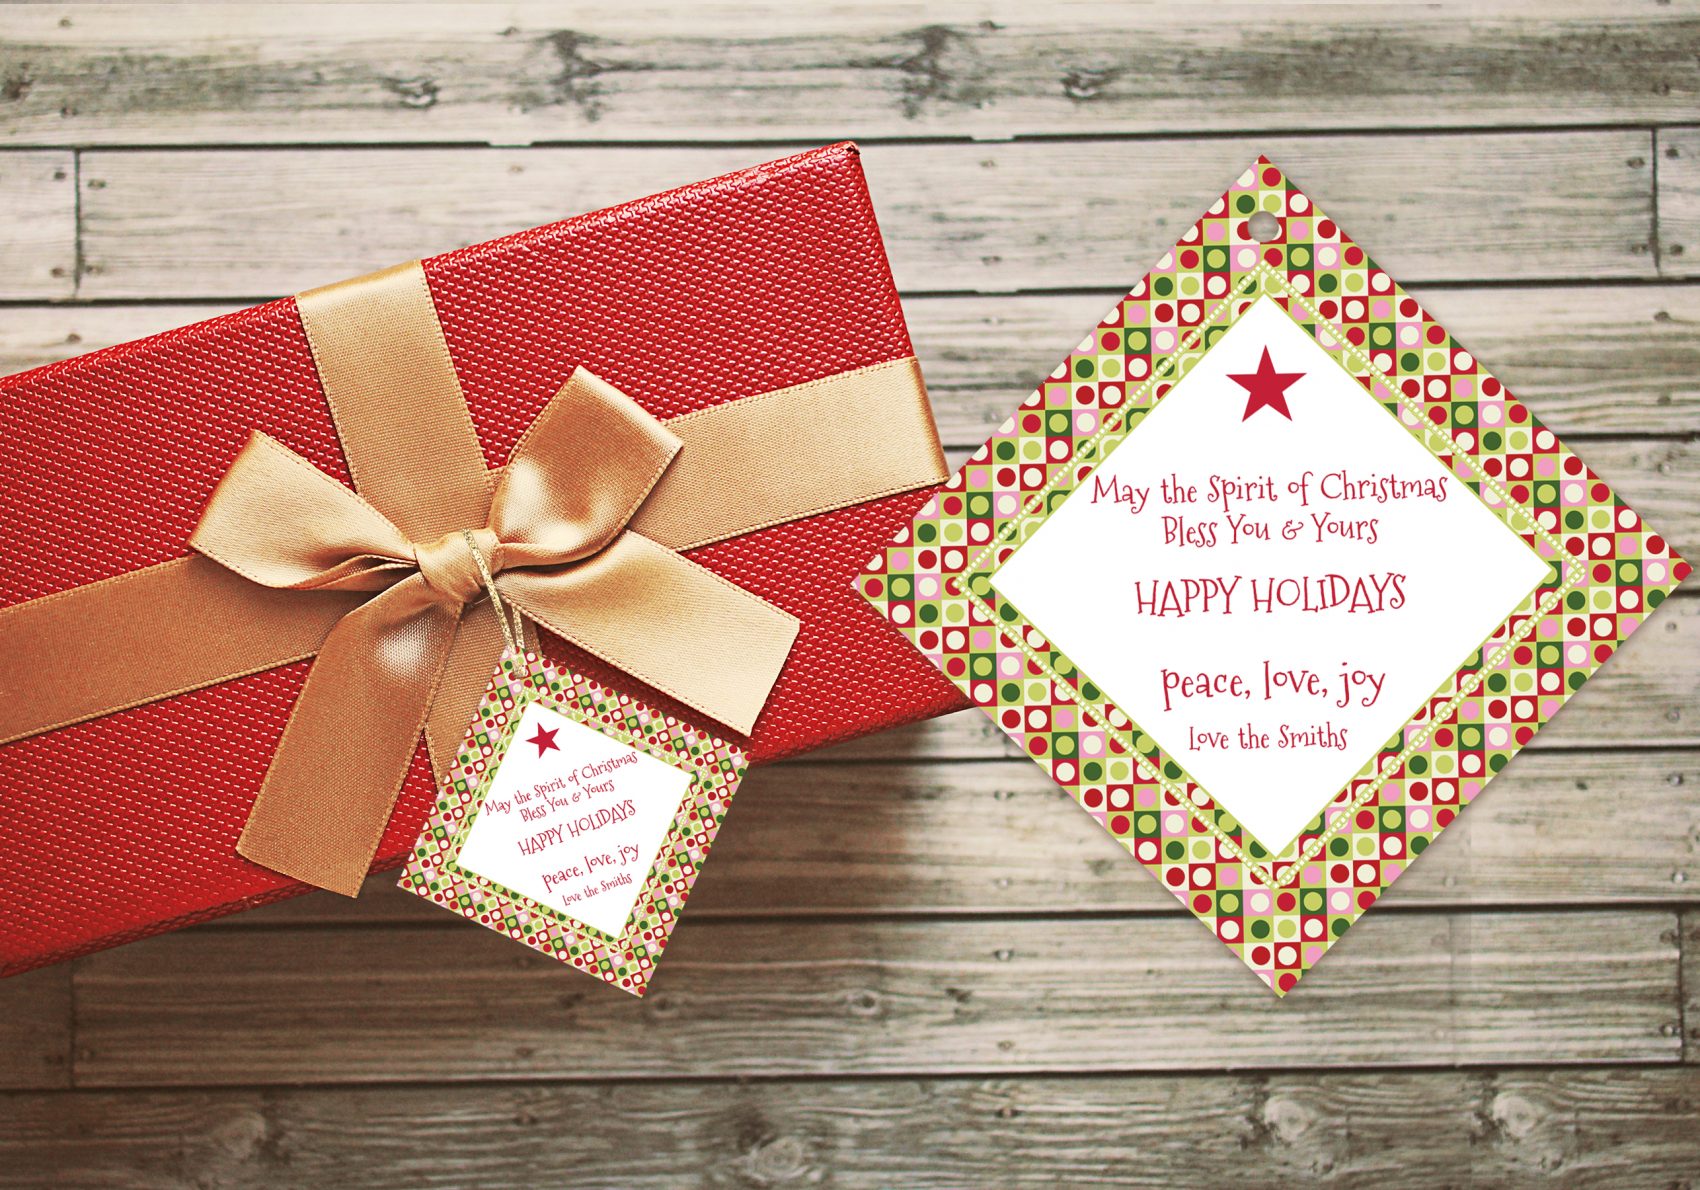 Hang tag with a custom greeting can replace expensive greeting cards.